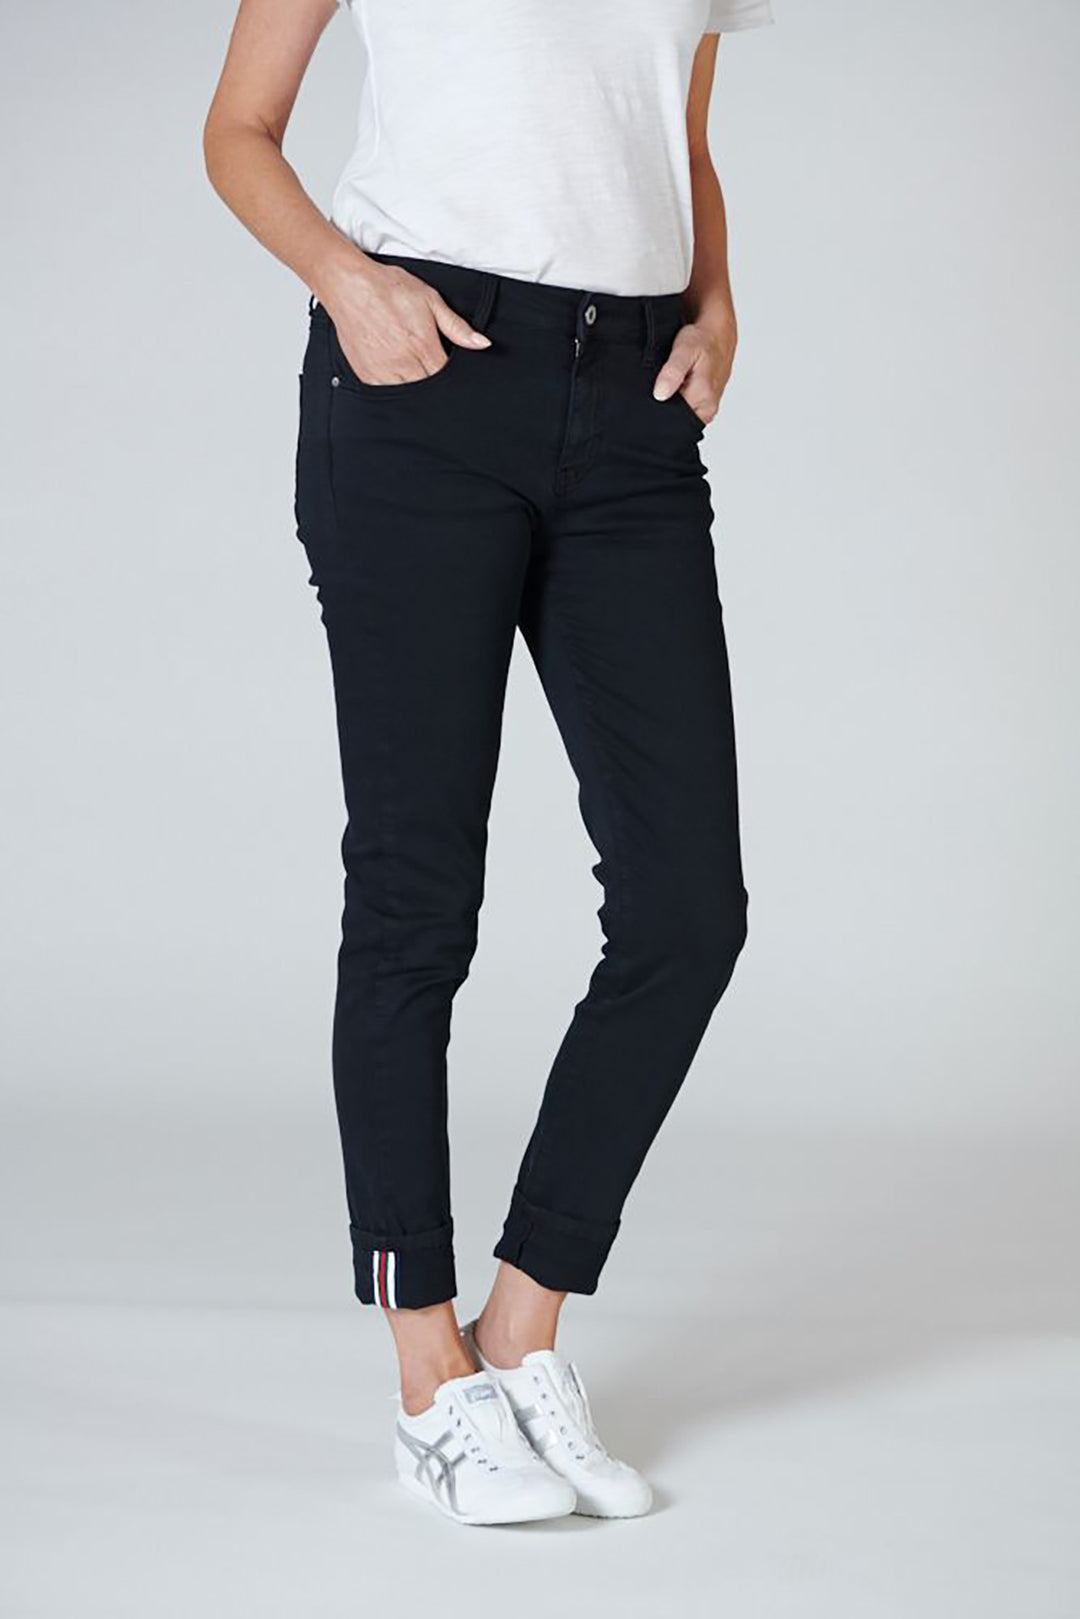 Polo Ankle Detail Jeans - Black - IS15